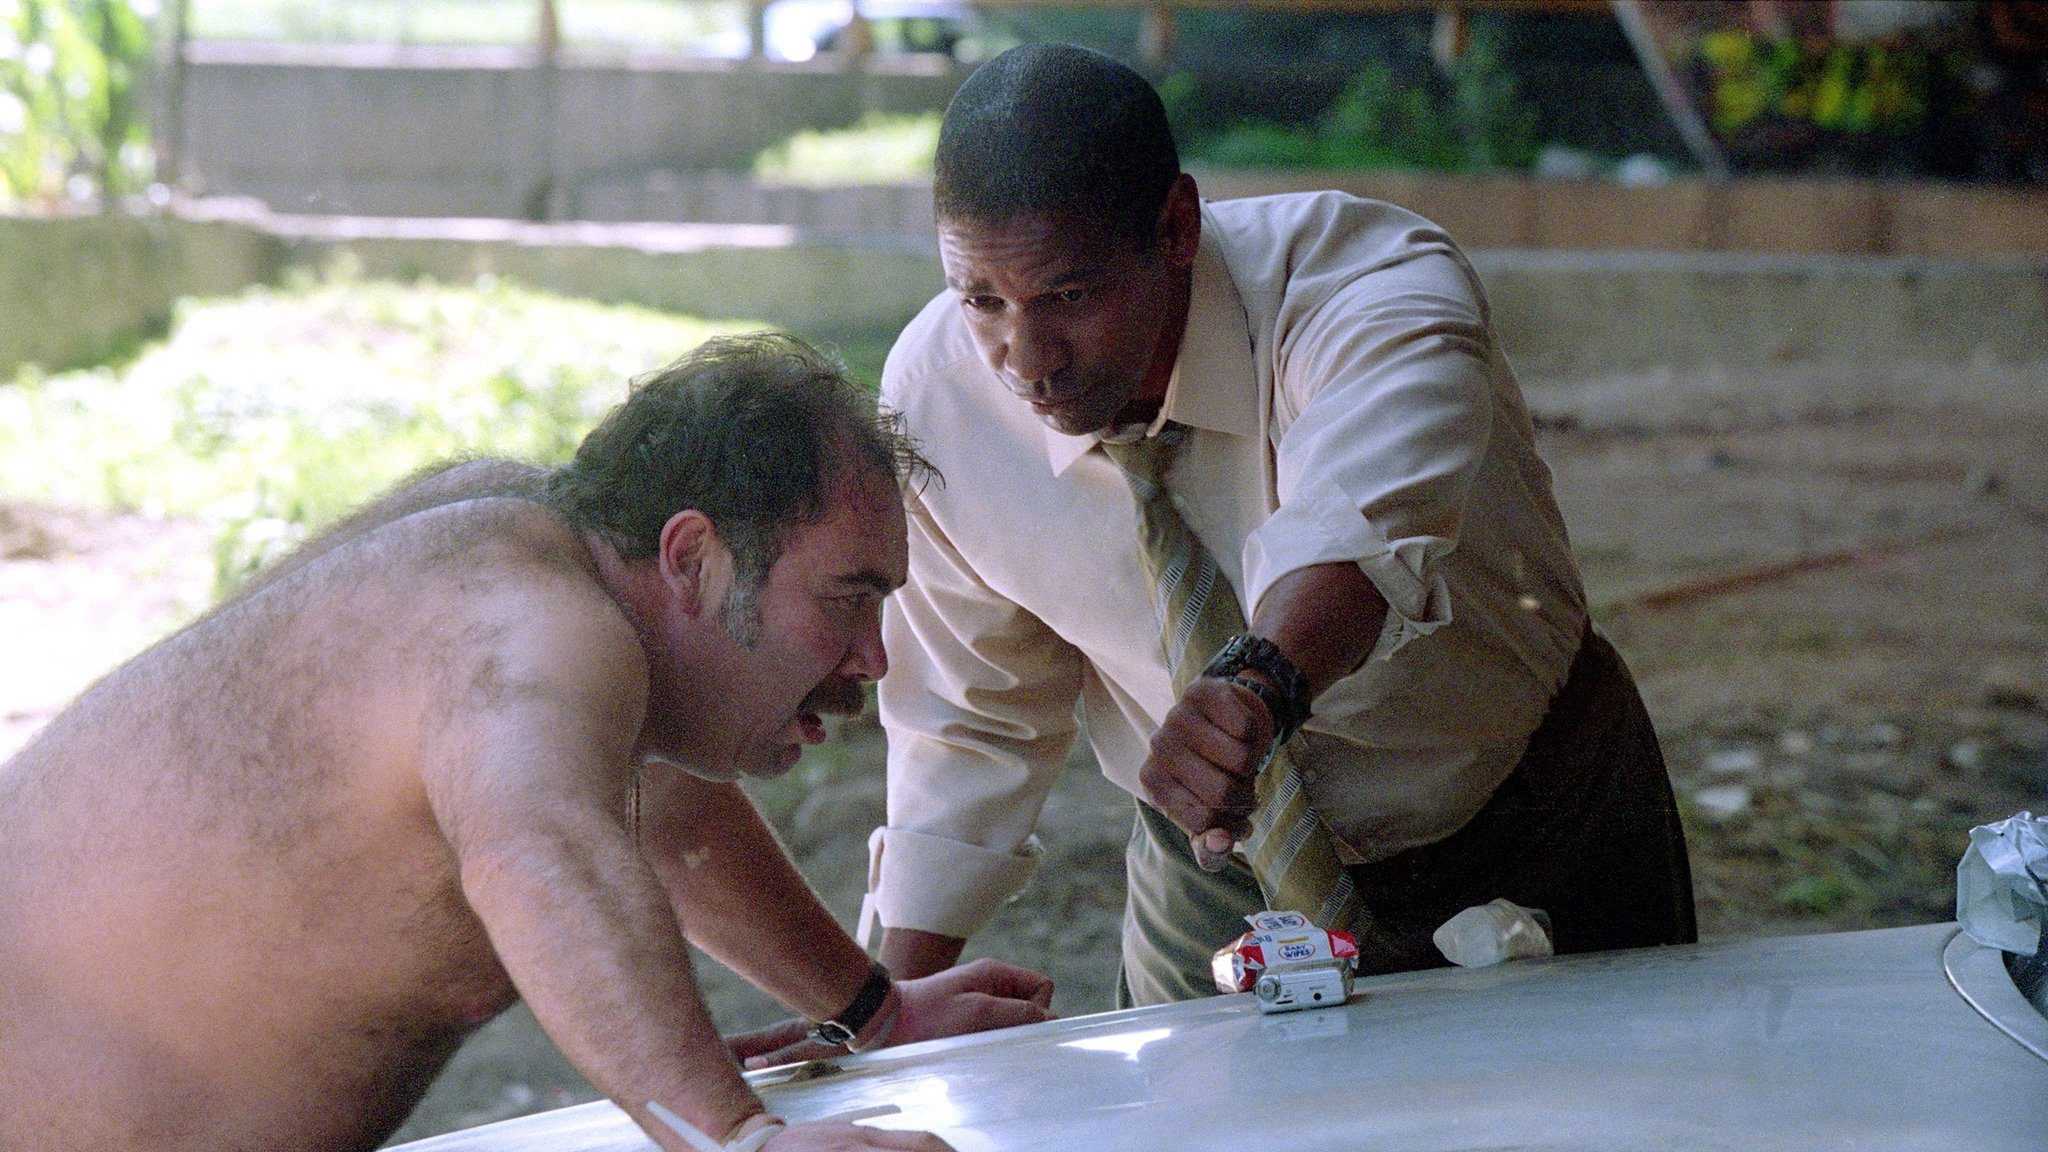 A scene from Man On Fire